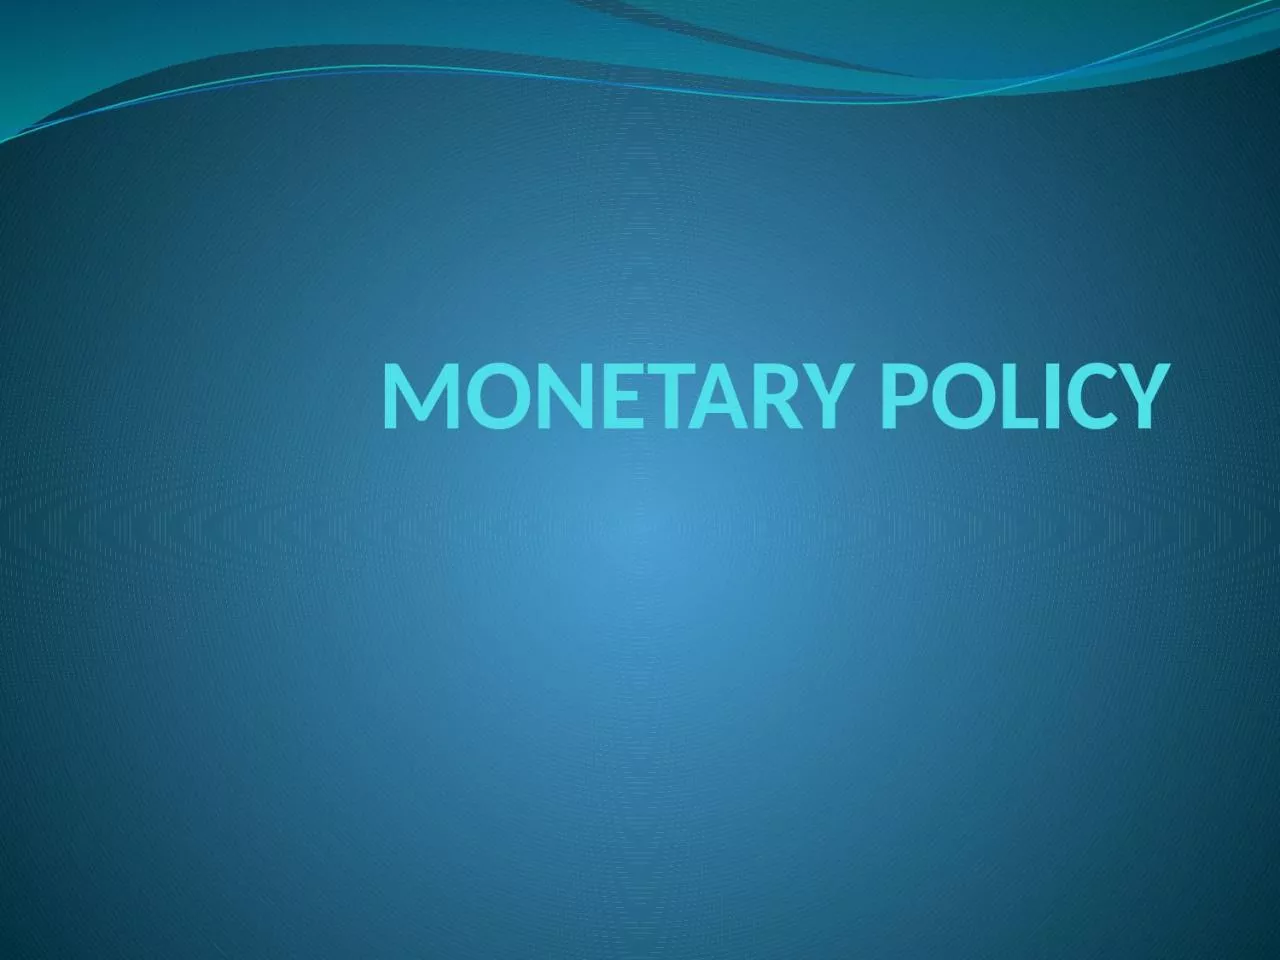 MONETARY POLICY MEANING OF MONETARY POLICY